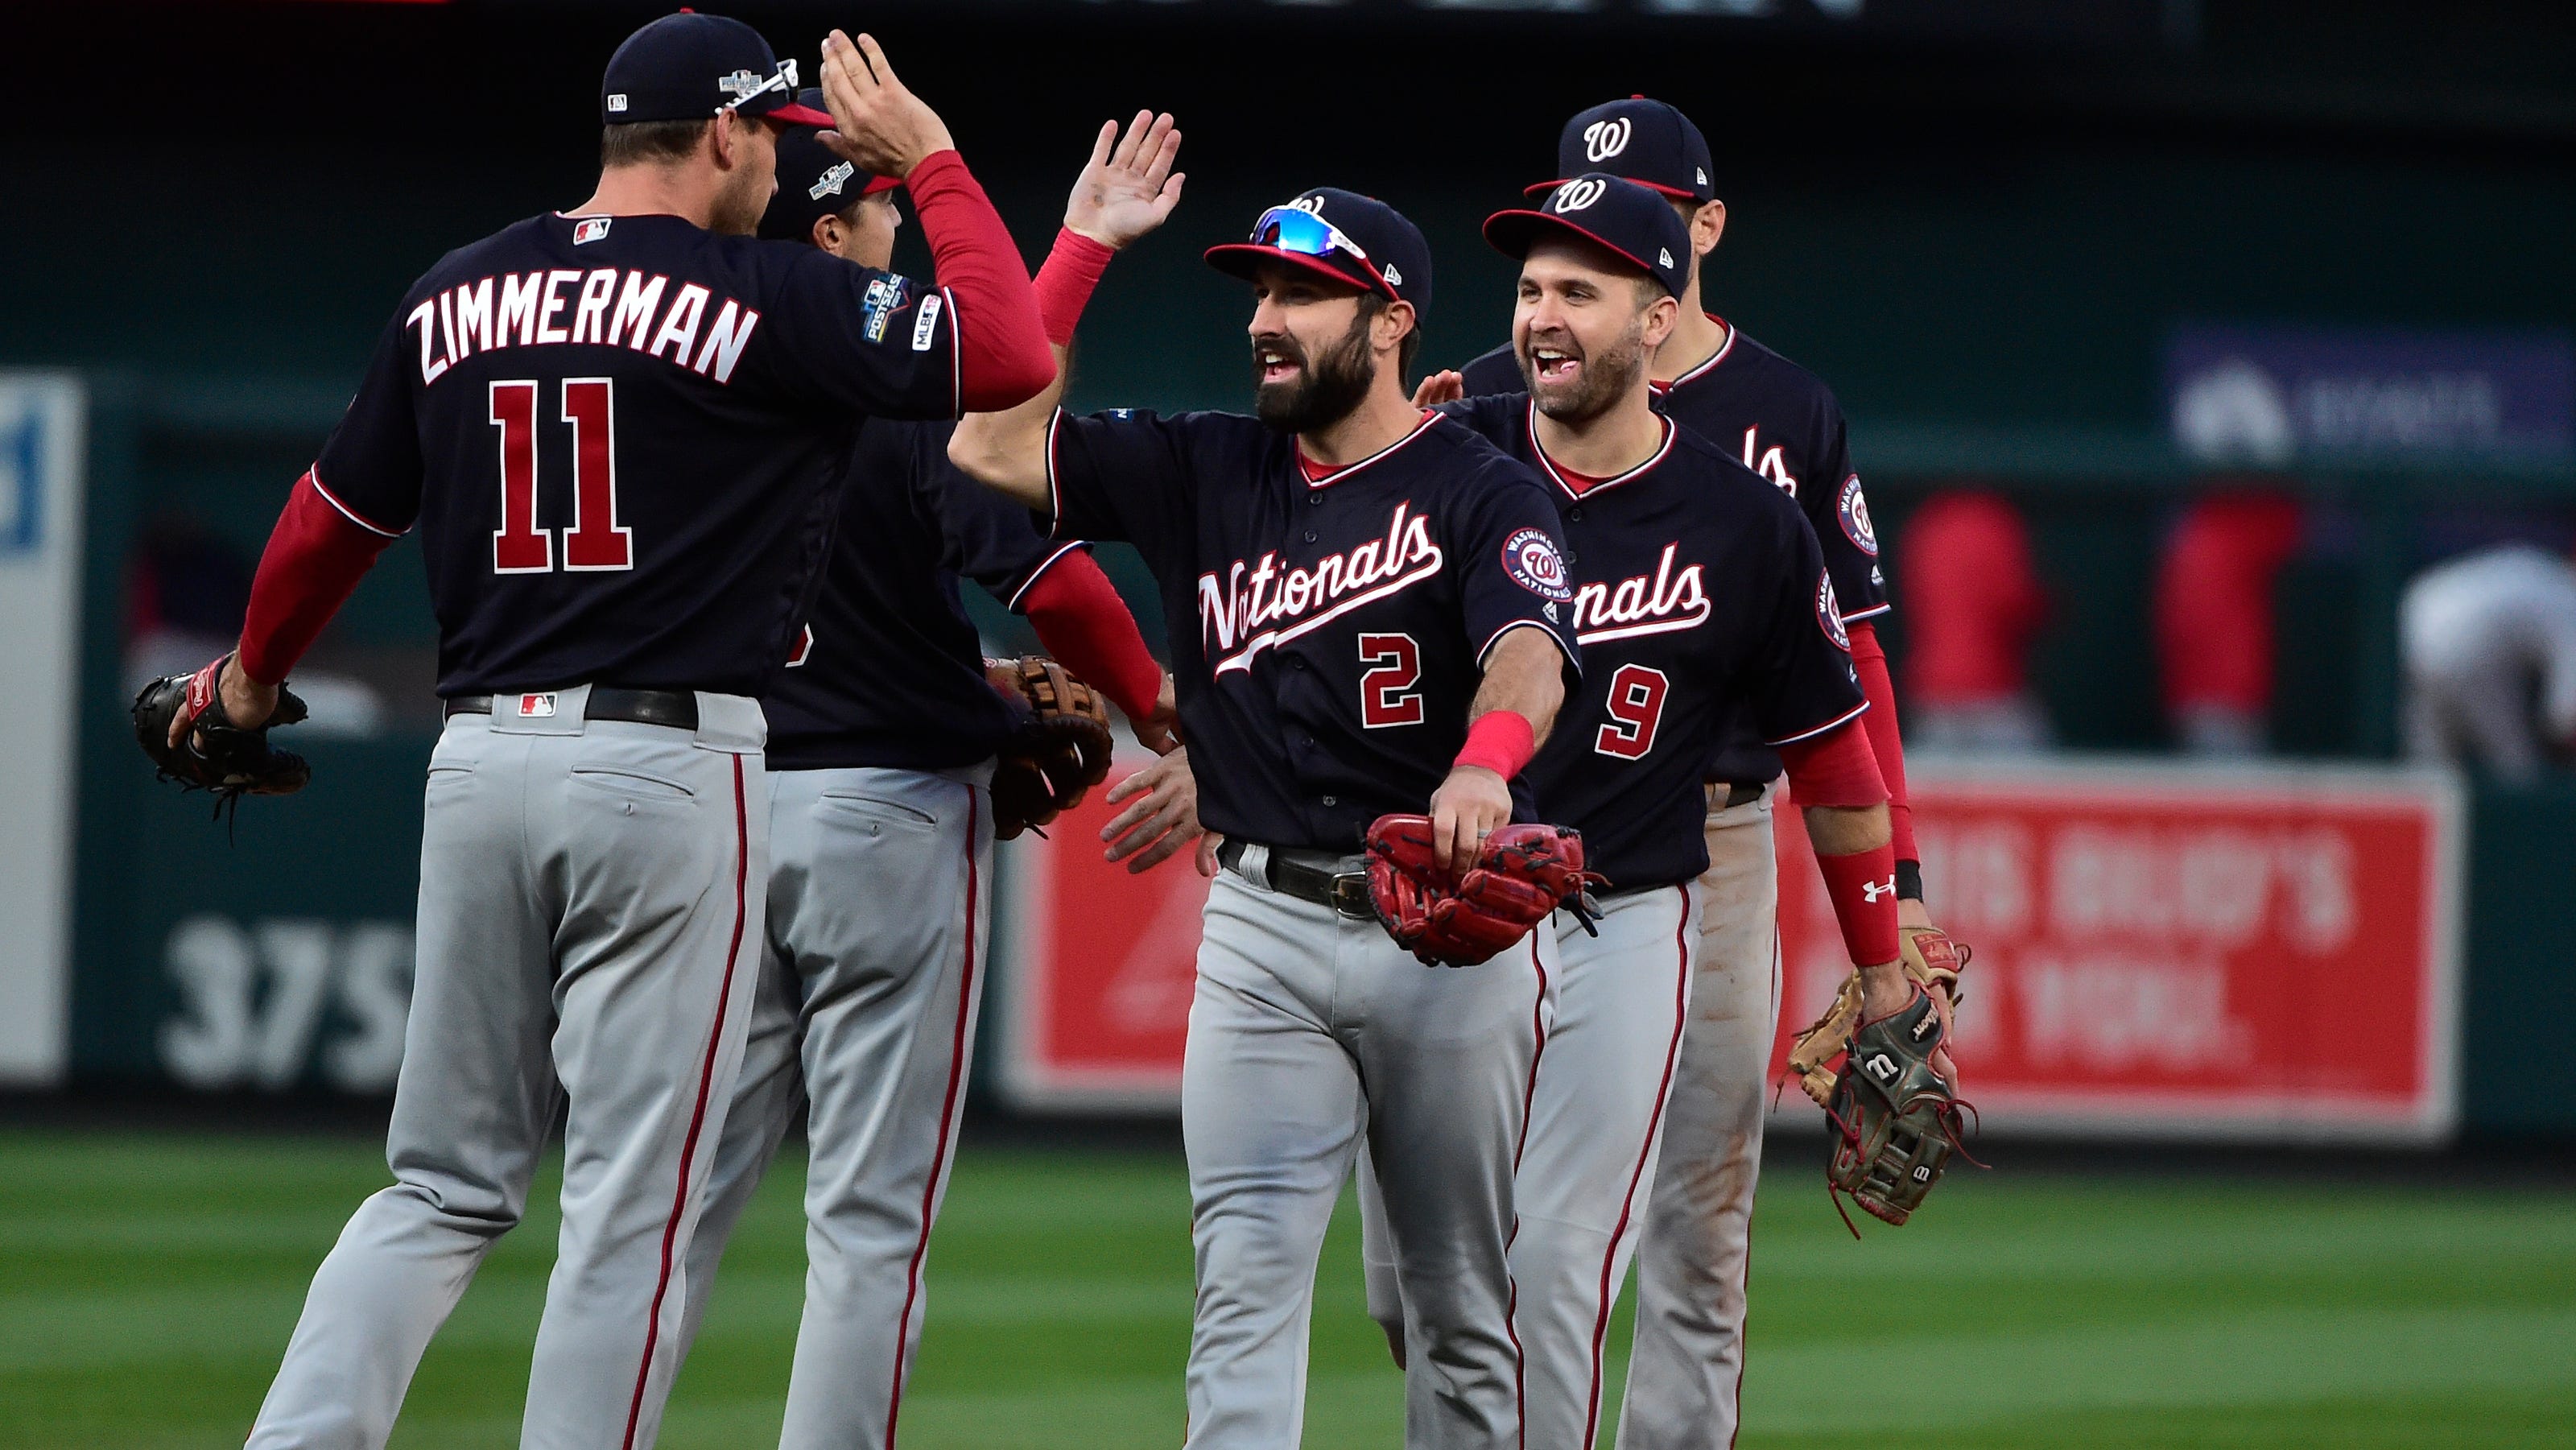 MLB playoffs: Nationals look unbeatable against Cardinals in NLCS